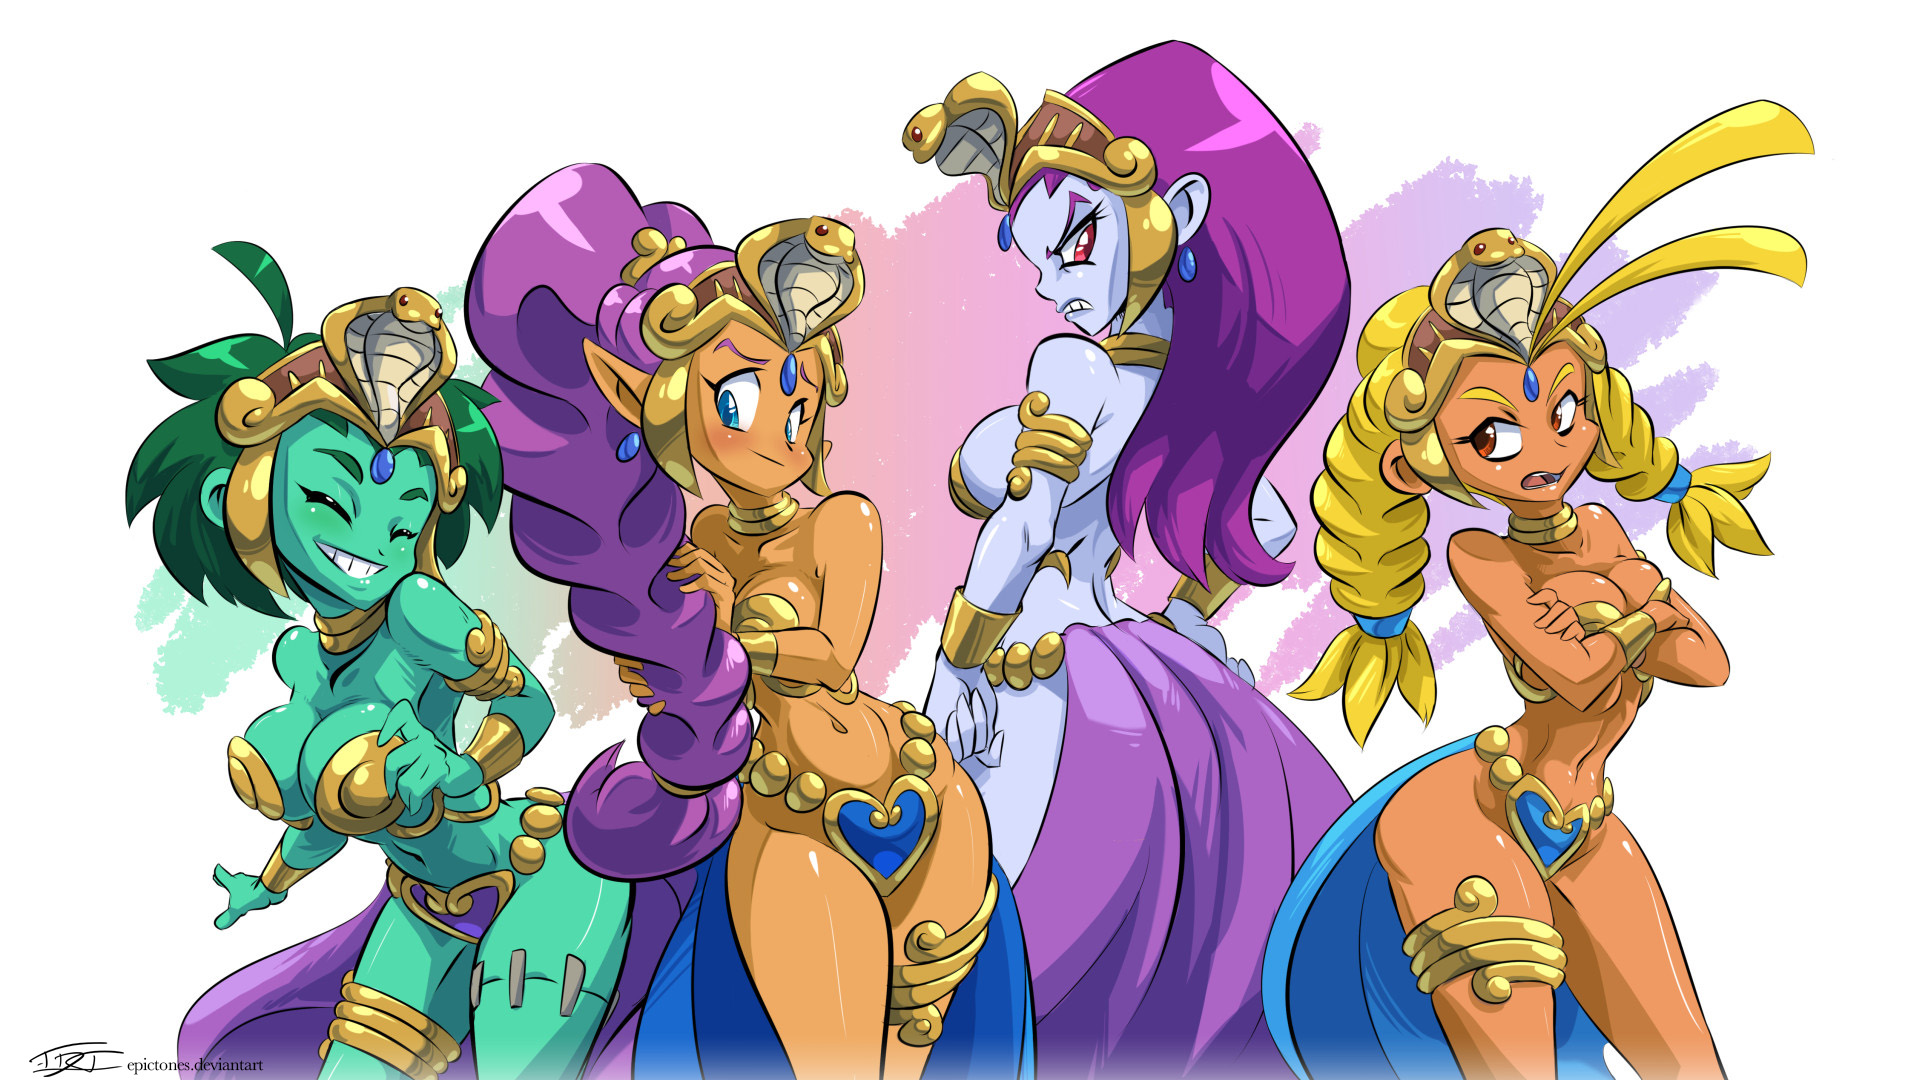 General 1920x1080 Shantae and the Pirate's Curse Risky Boots Shantae Rottytops (Shantae) Sky (Shantae) bikini armor drawing